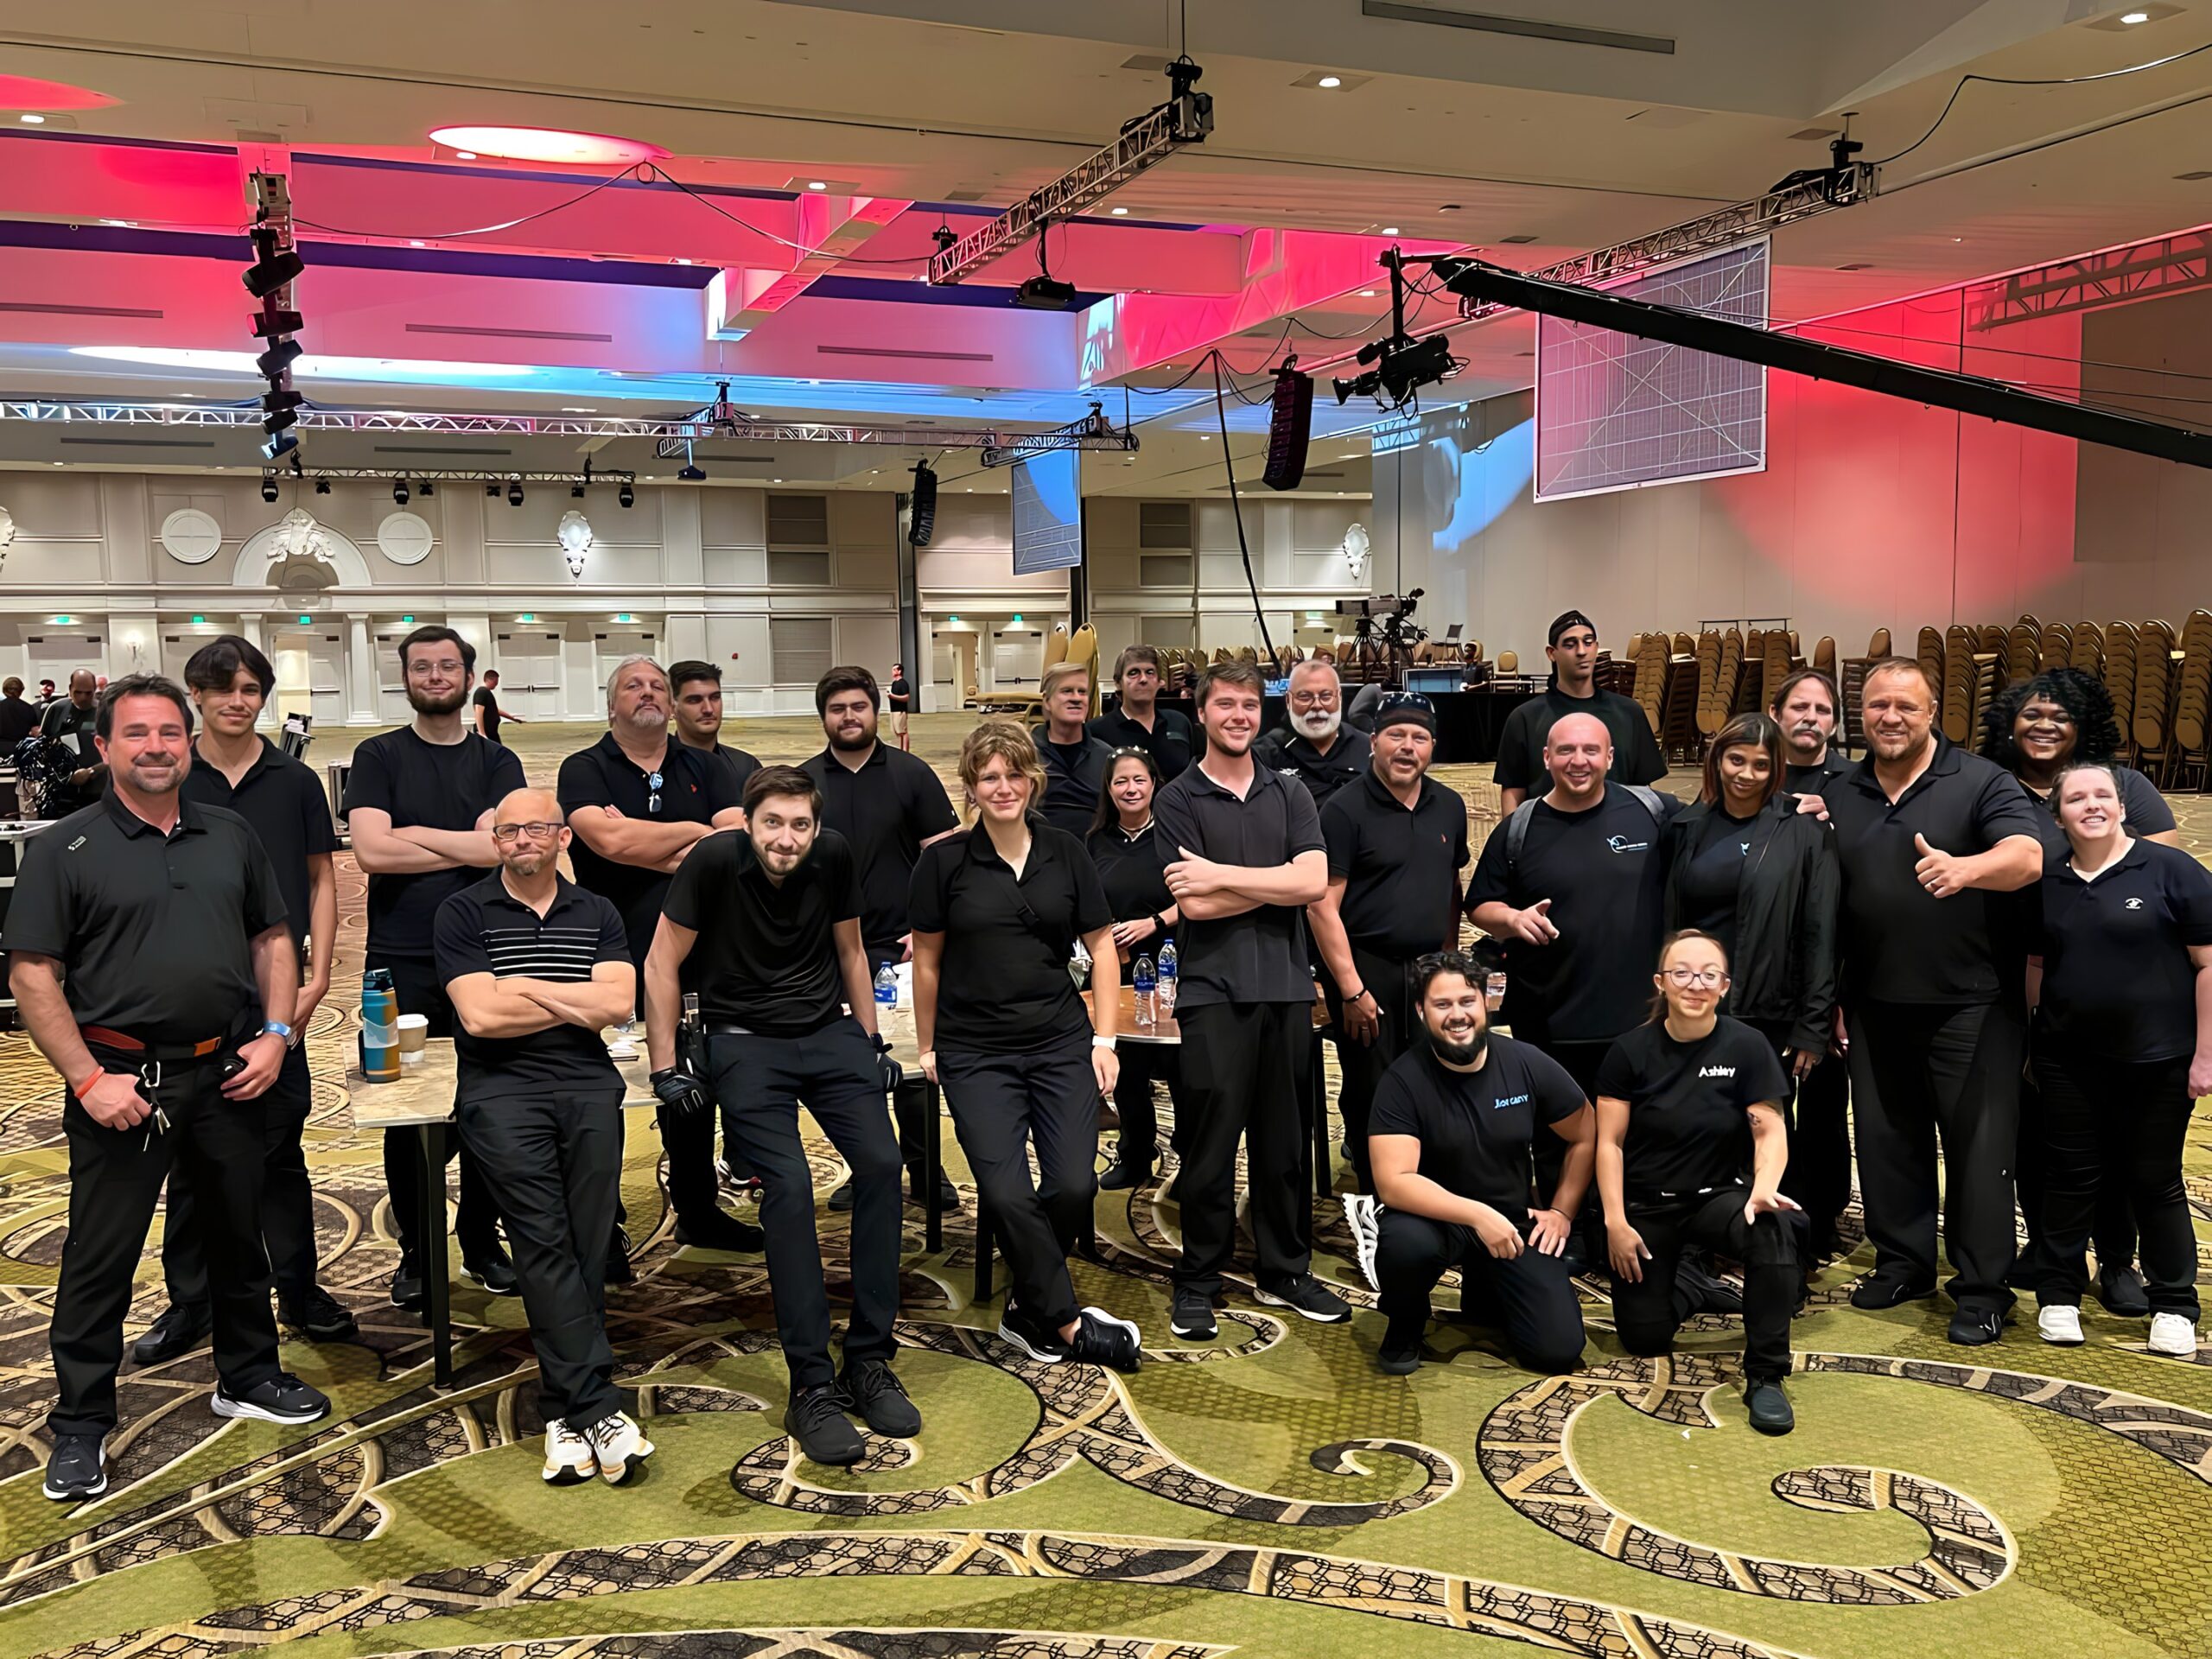 Group photo of an Audio Visual Nation Crew at an event